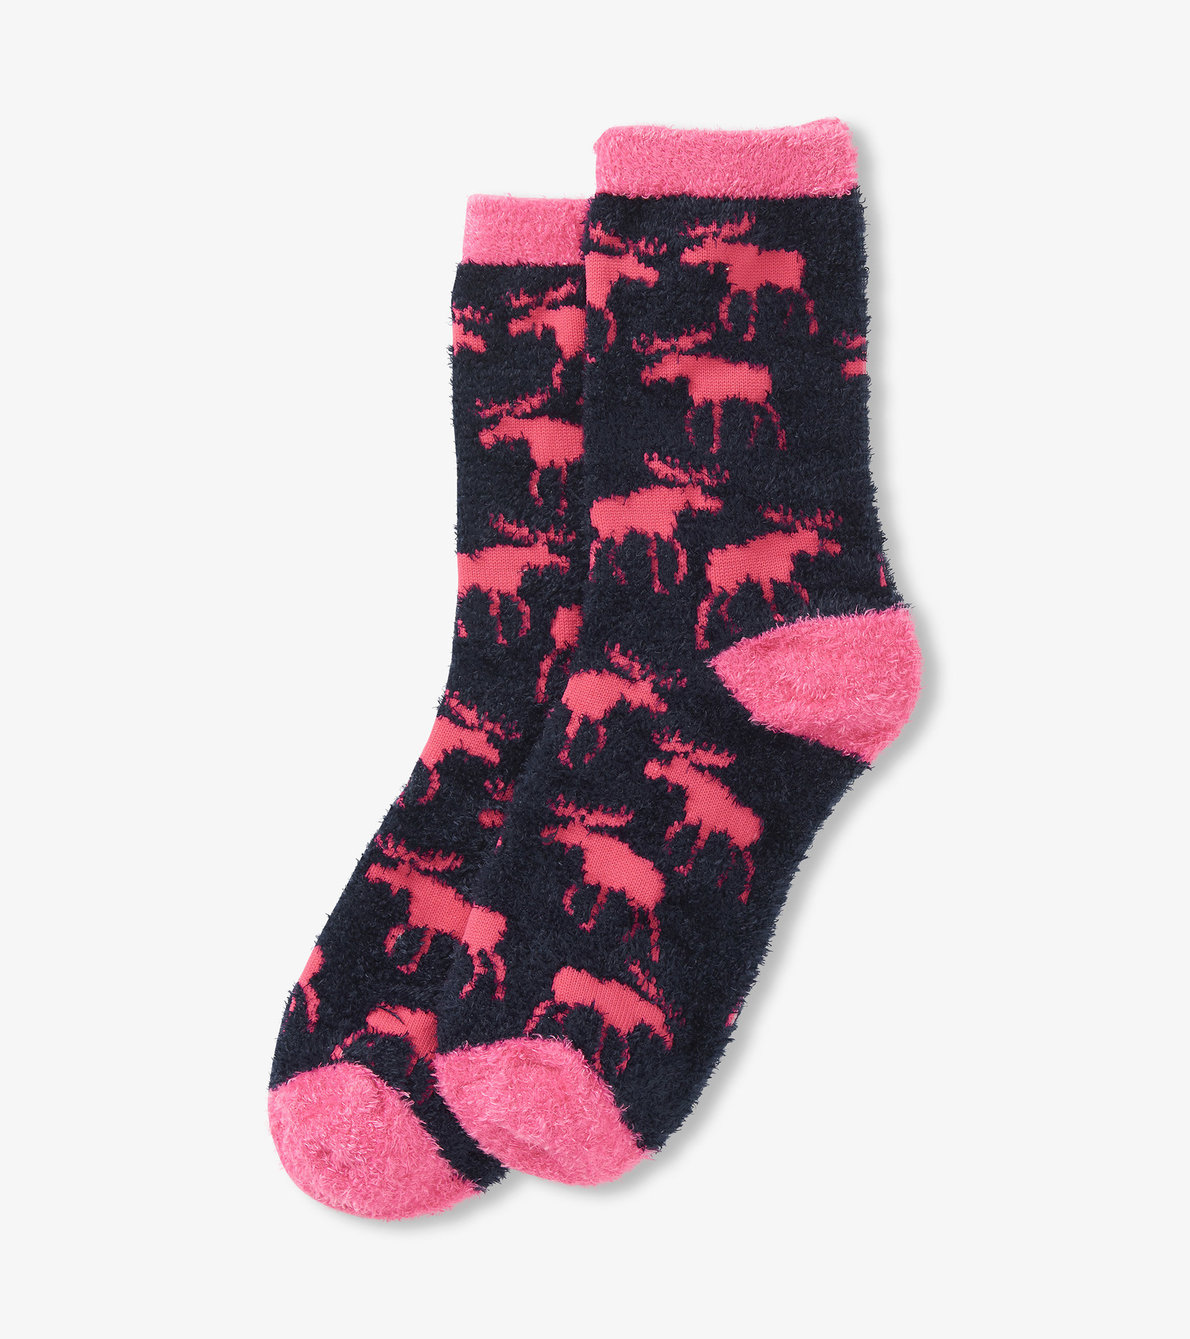 View larger image of Raspberry Moose Fuzzy Socks